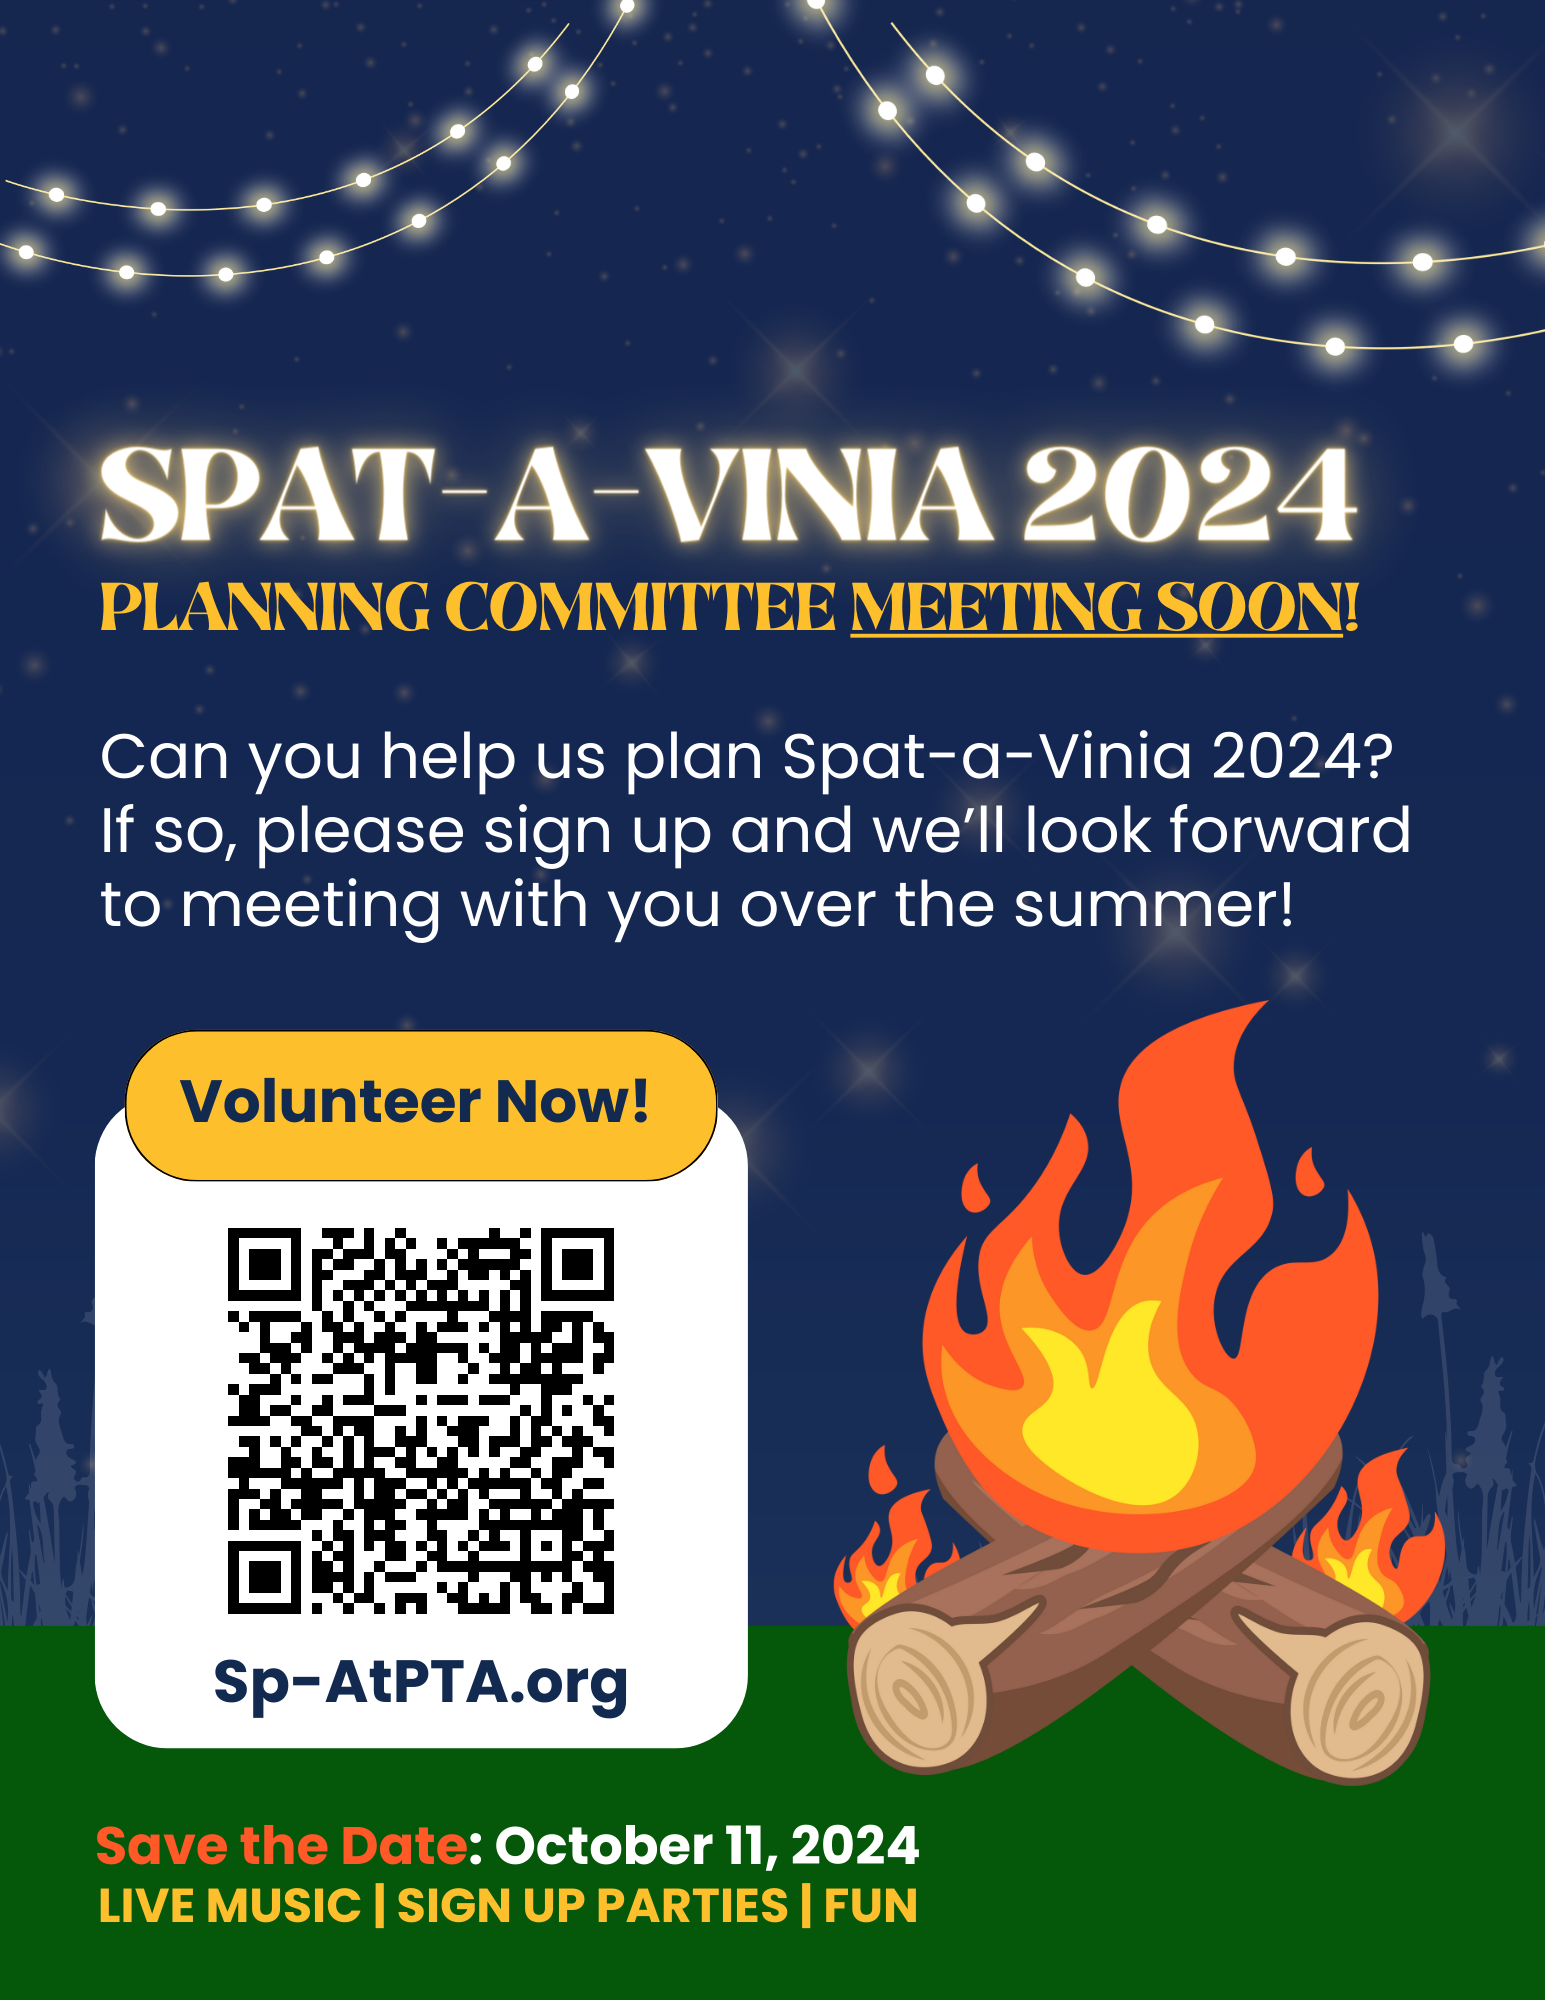 Spat-A-Vinia 2024 Planning Committee Meeting Soon! Can you help us plan? If so, please sign up and we'll look forward to meeting with you over the summer! Save the Date: October 11, 2024 Live Music, Sign Up Parties, Fun!